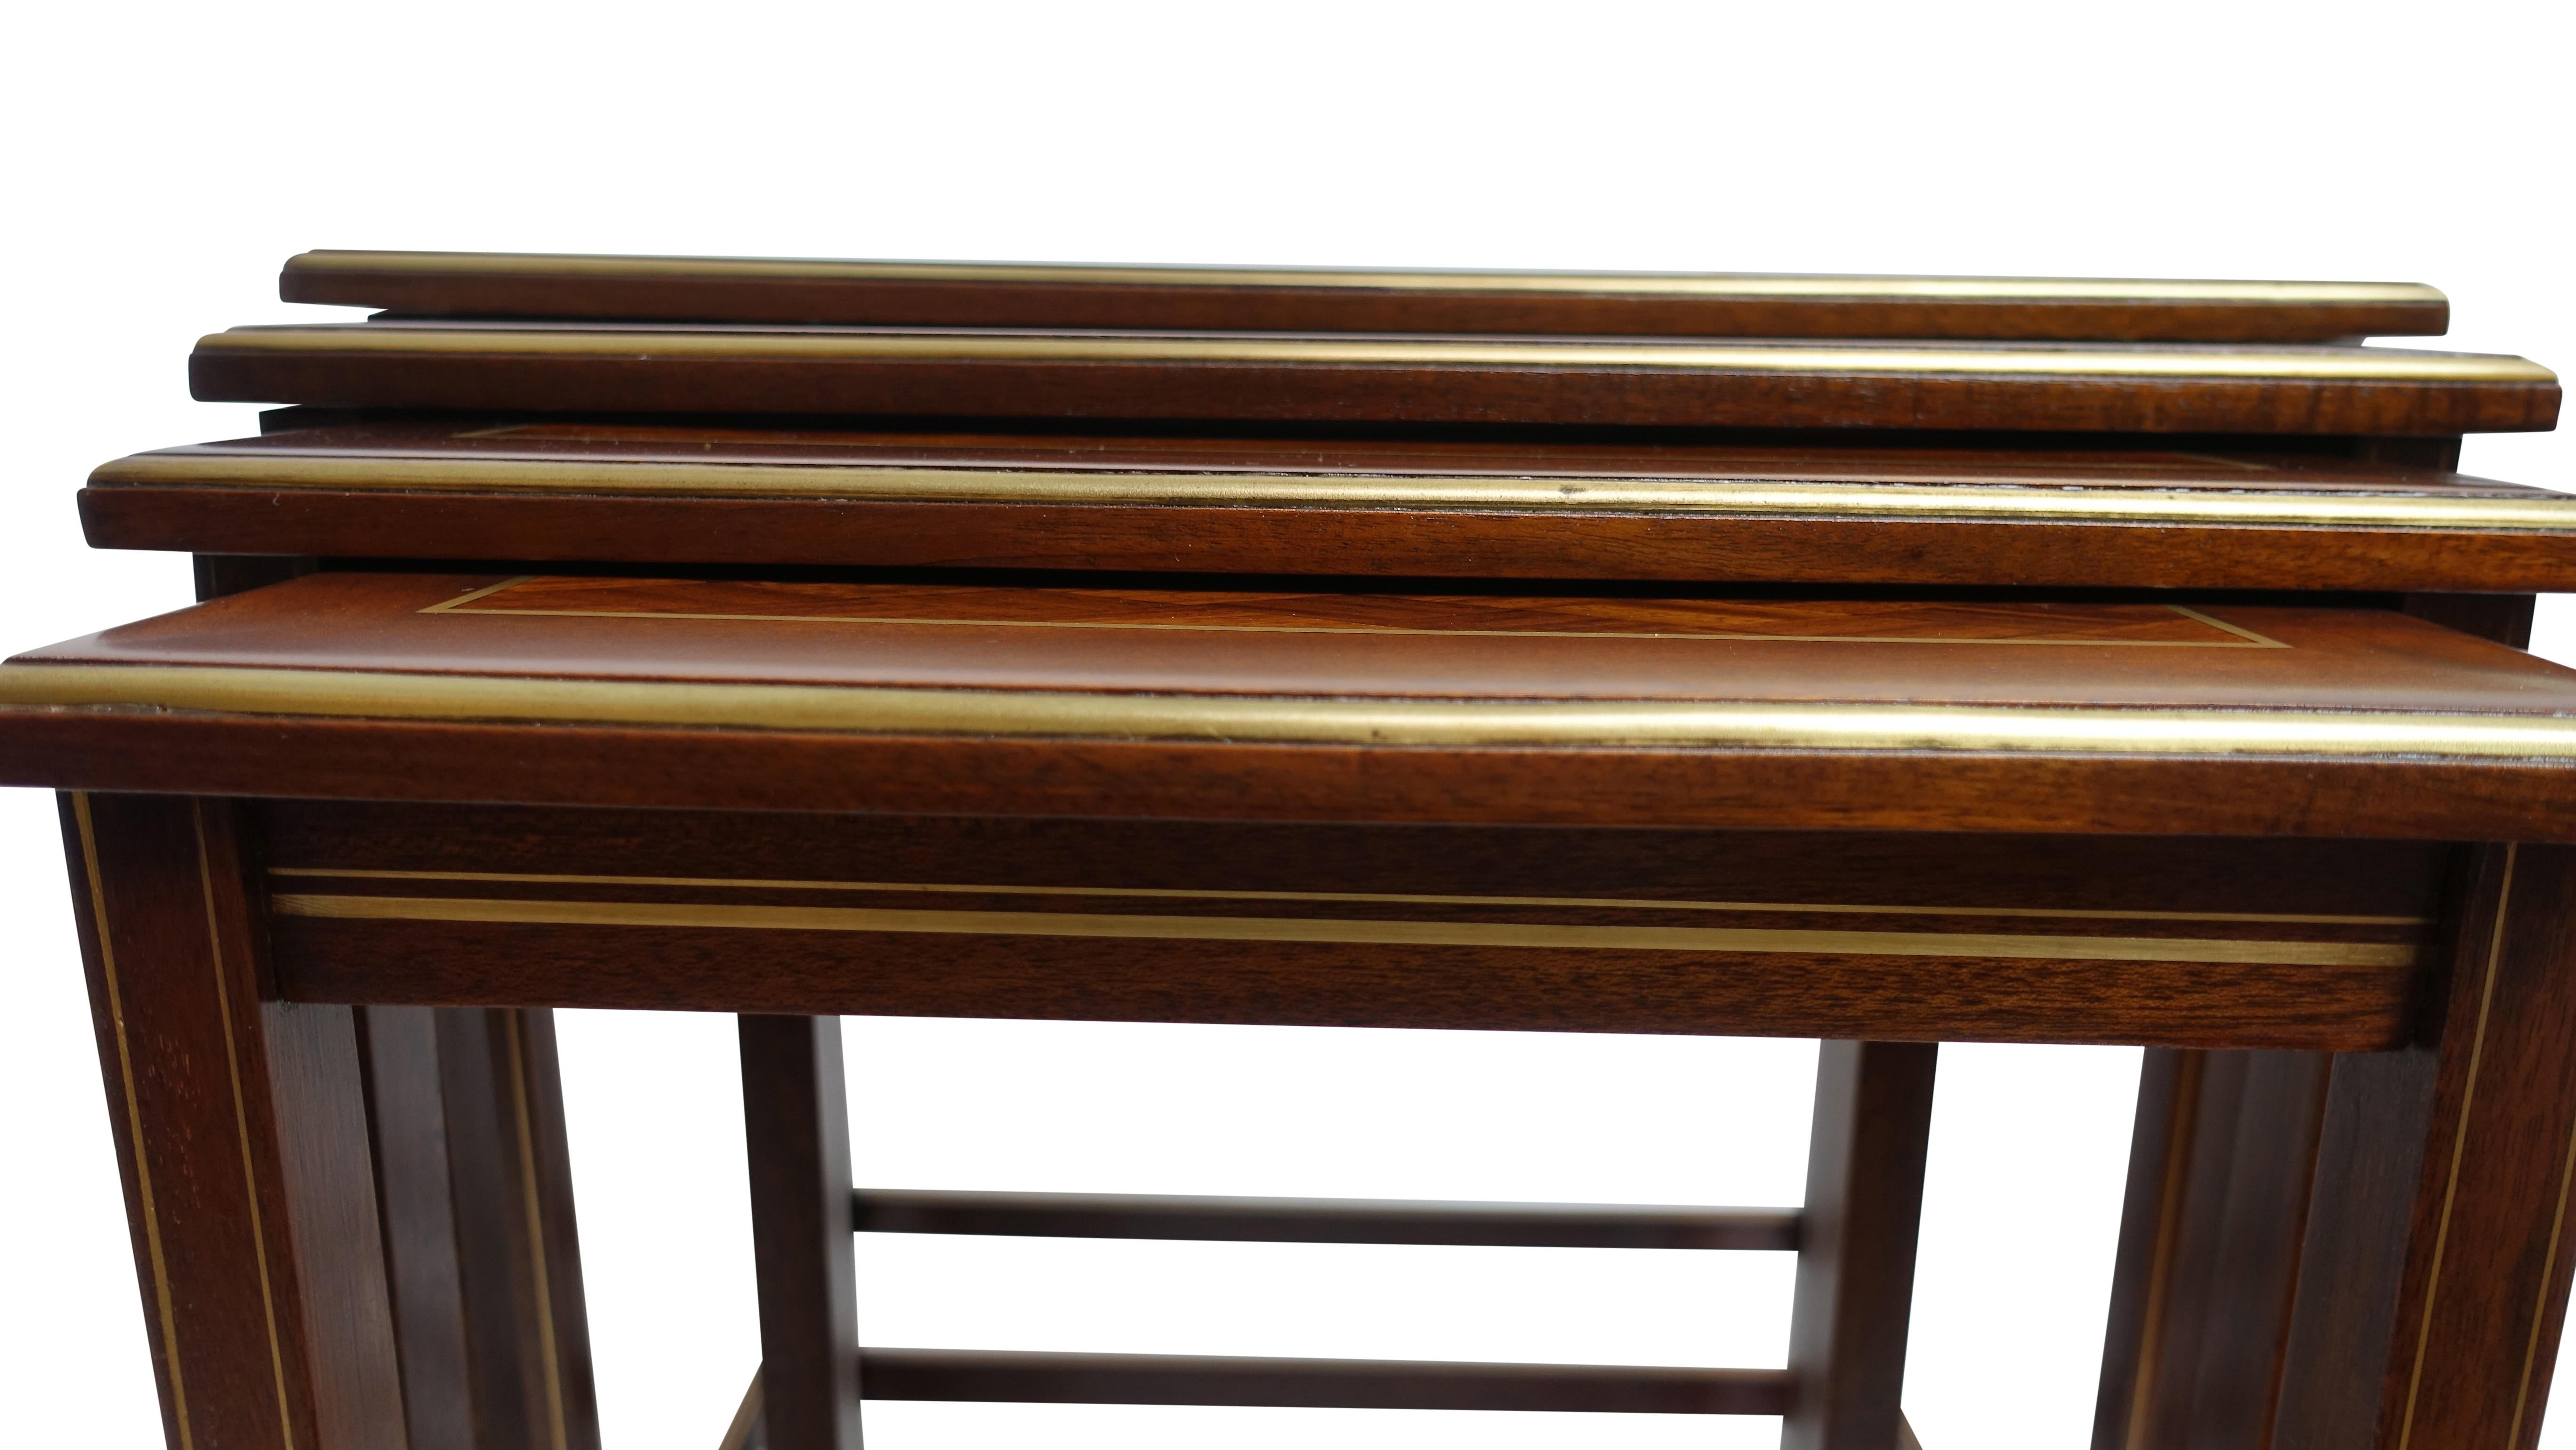 Set of Four Mahogany Nesting Tables with Brass Inlay and Trim, Mid-20th Century For Sale 4